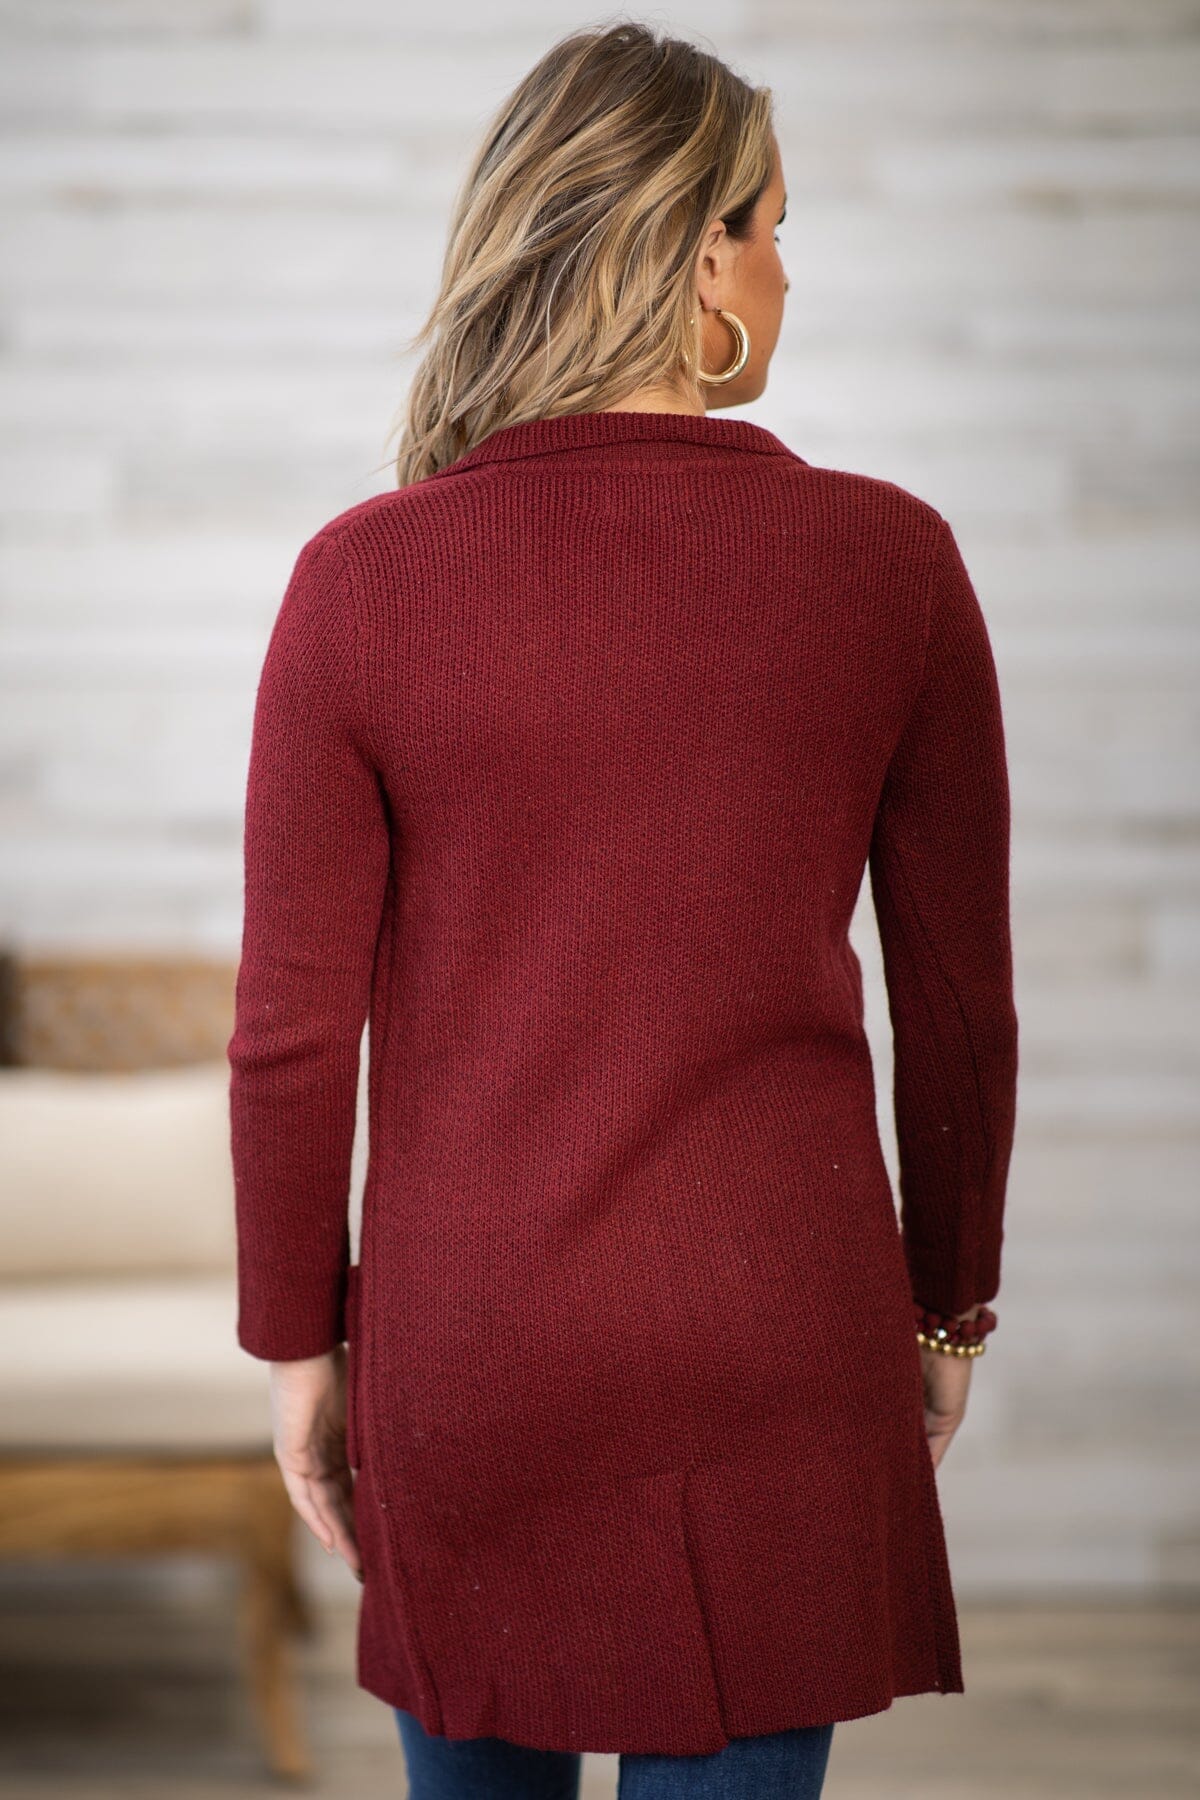 Burgundy Collared Mid Length Cardigan - Filly Flair